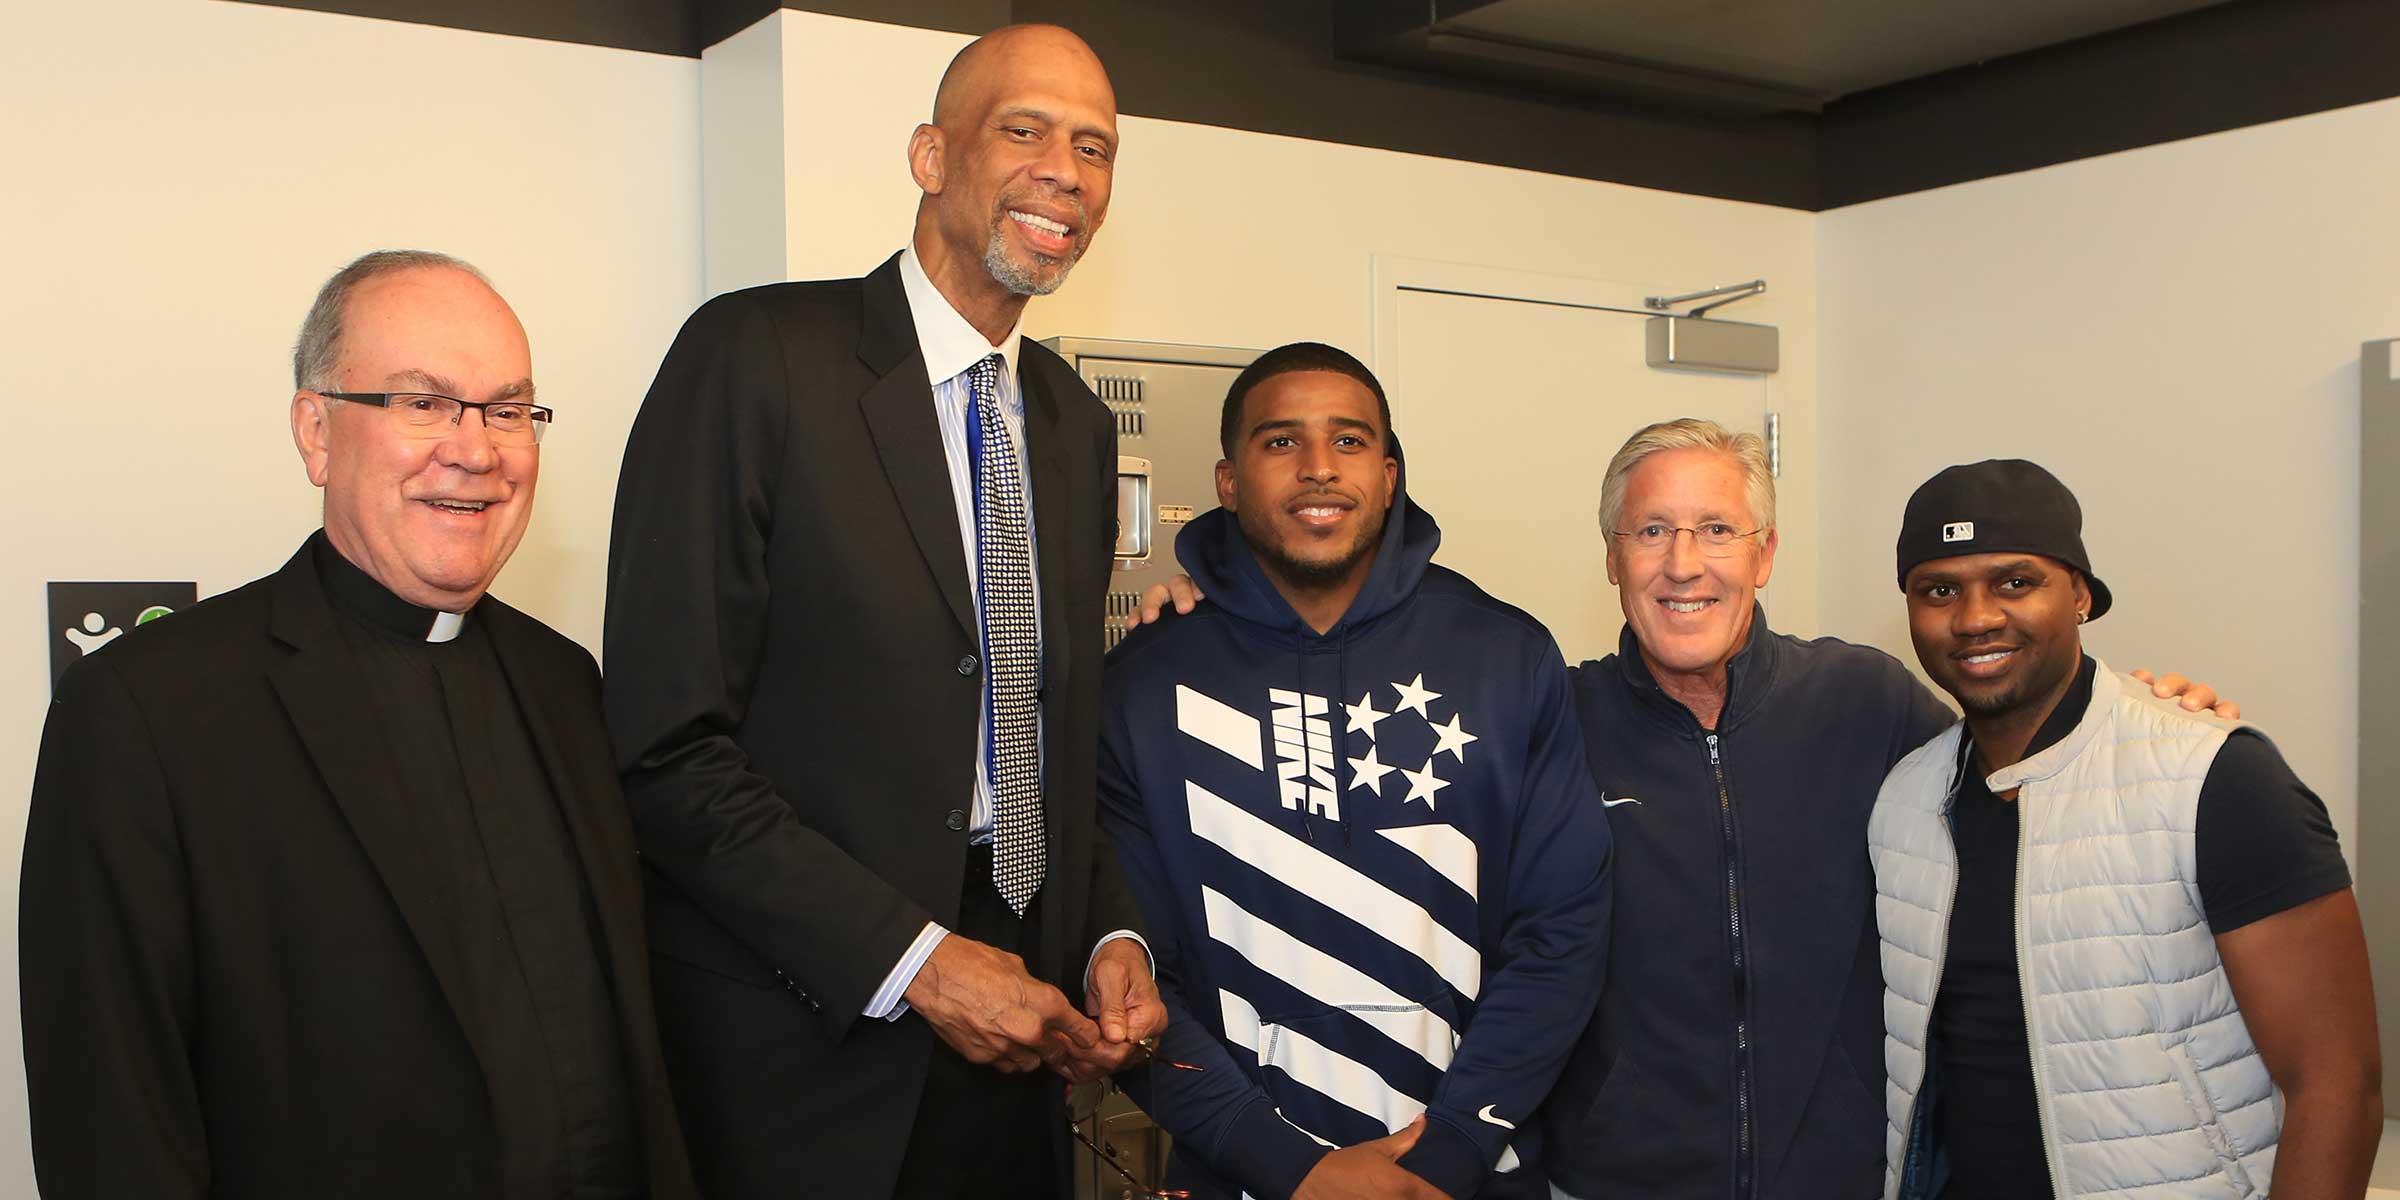 Father Steve pictured with Kareem Abdul-Jabbar, Bobby Wagner, Pete Carroll, and one other unidentified person on September 9, 2016 at the Seattle Town Hall.